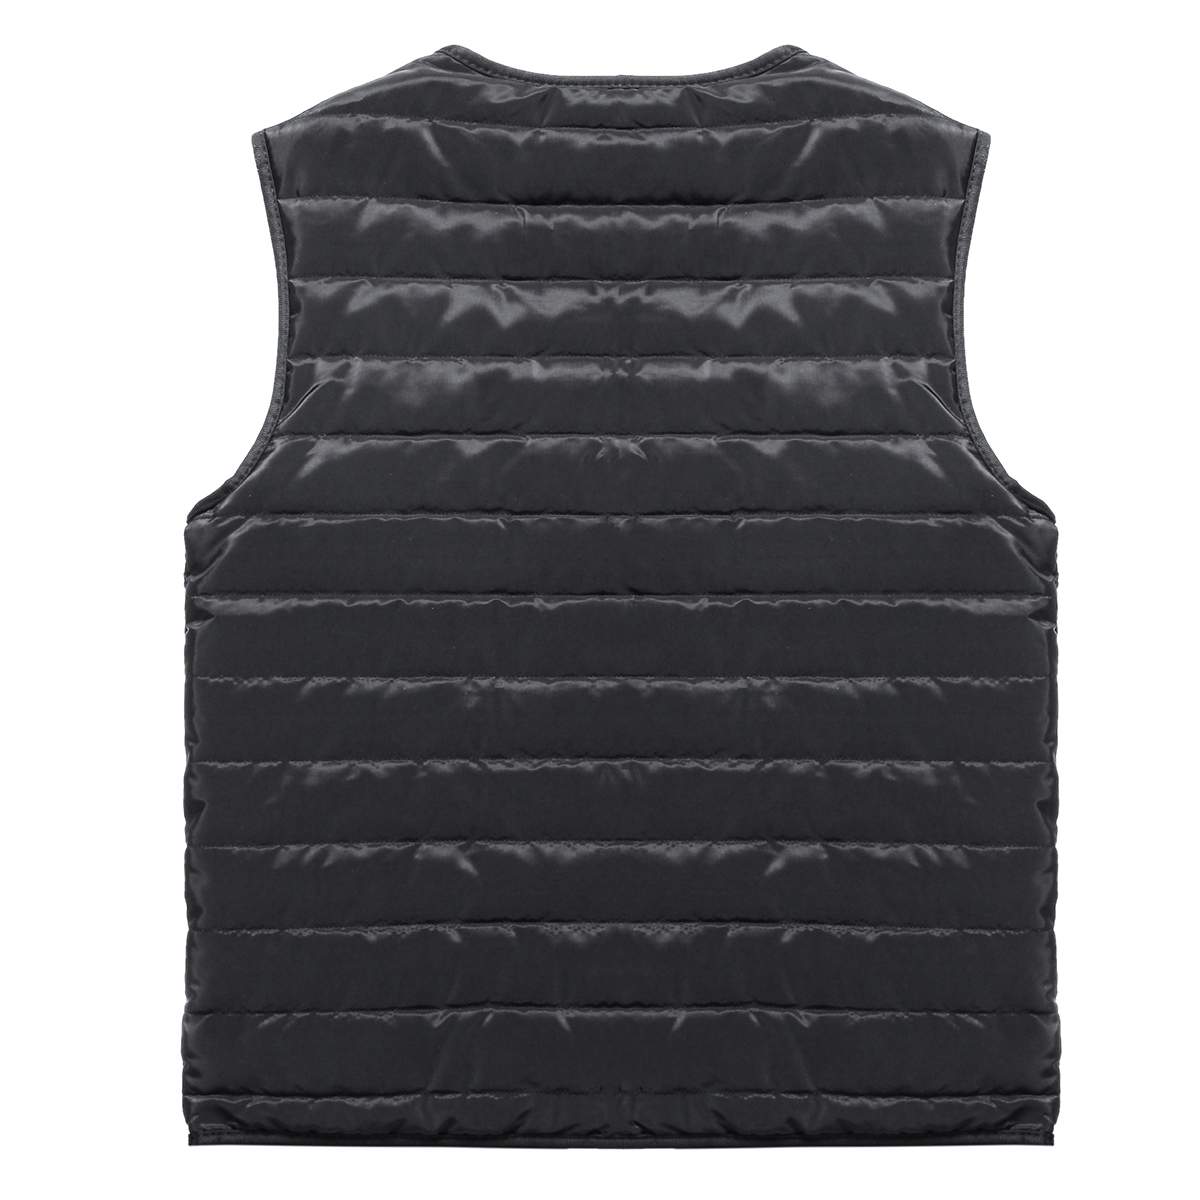 Picture of a Heated Winter Thermal Cotton Vest black rear 